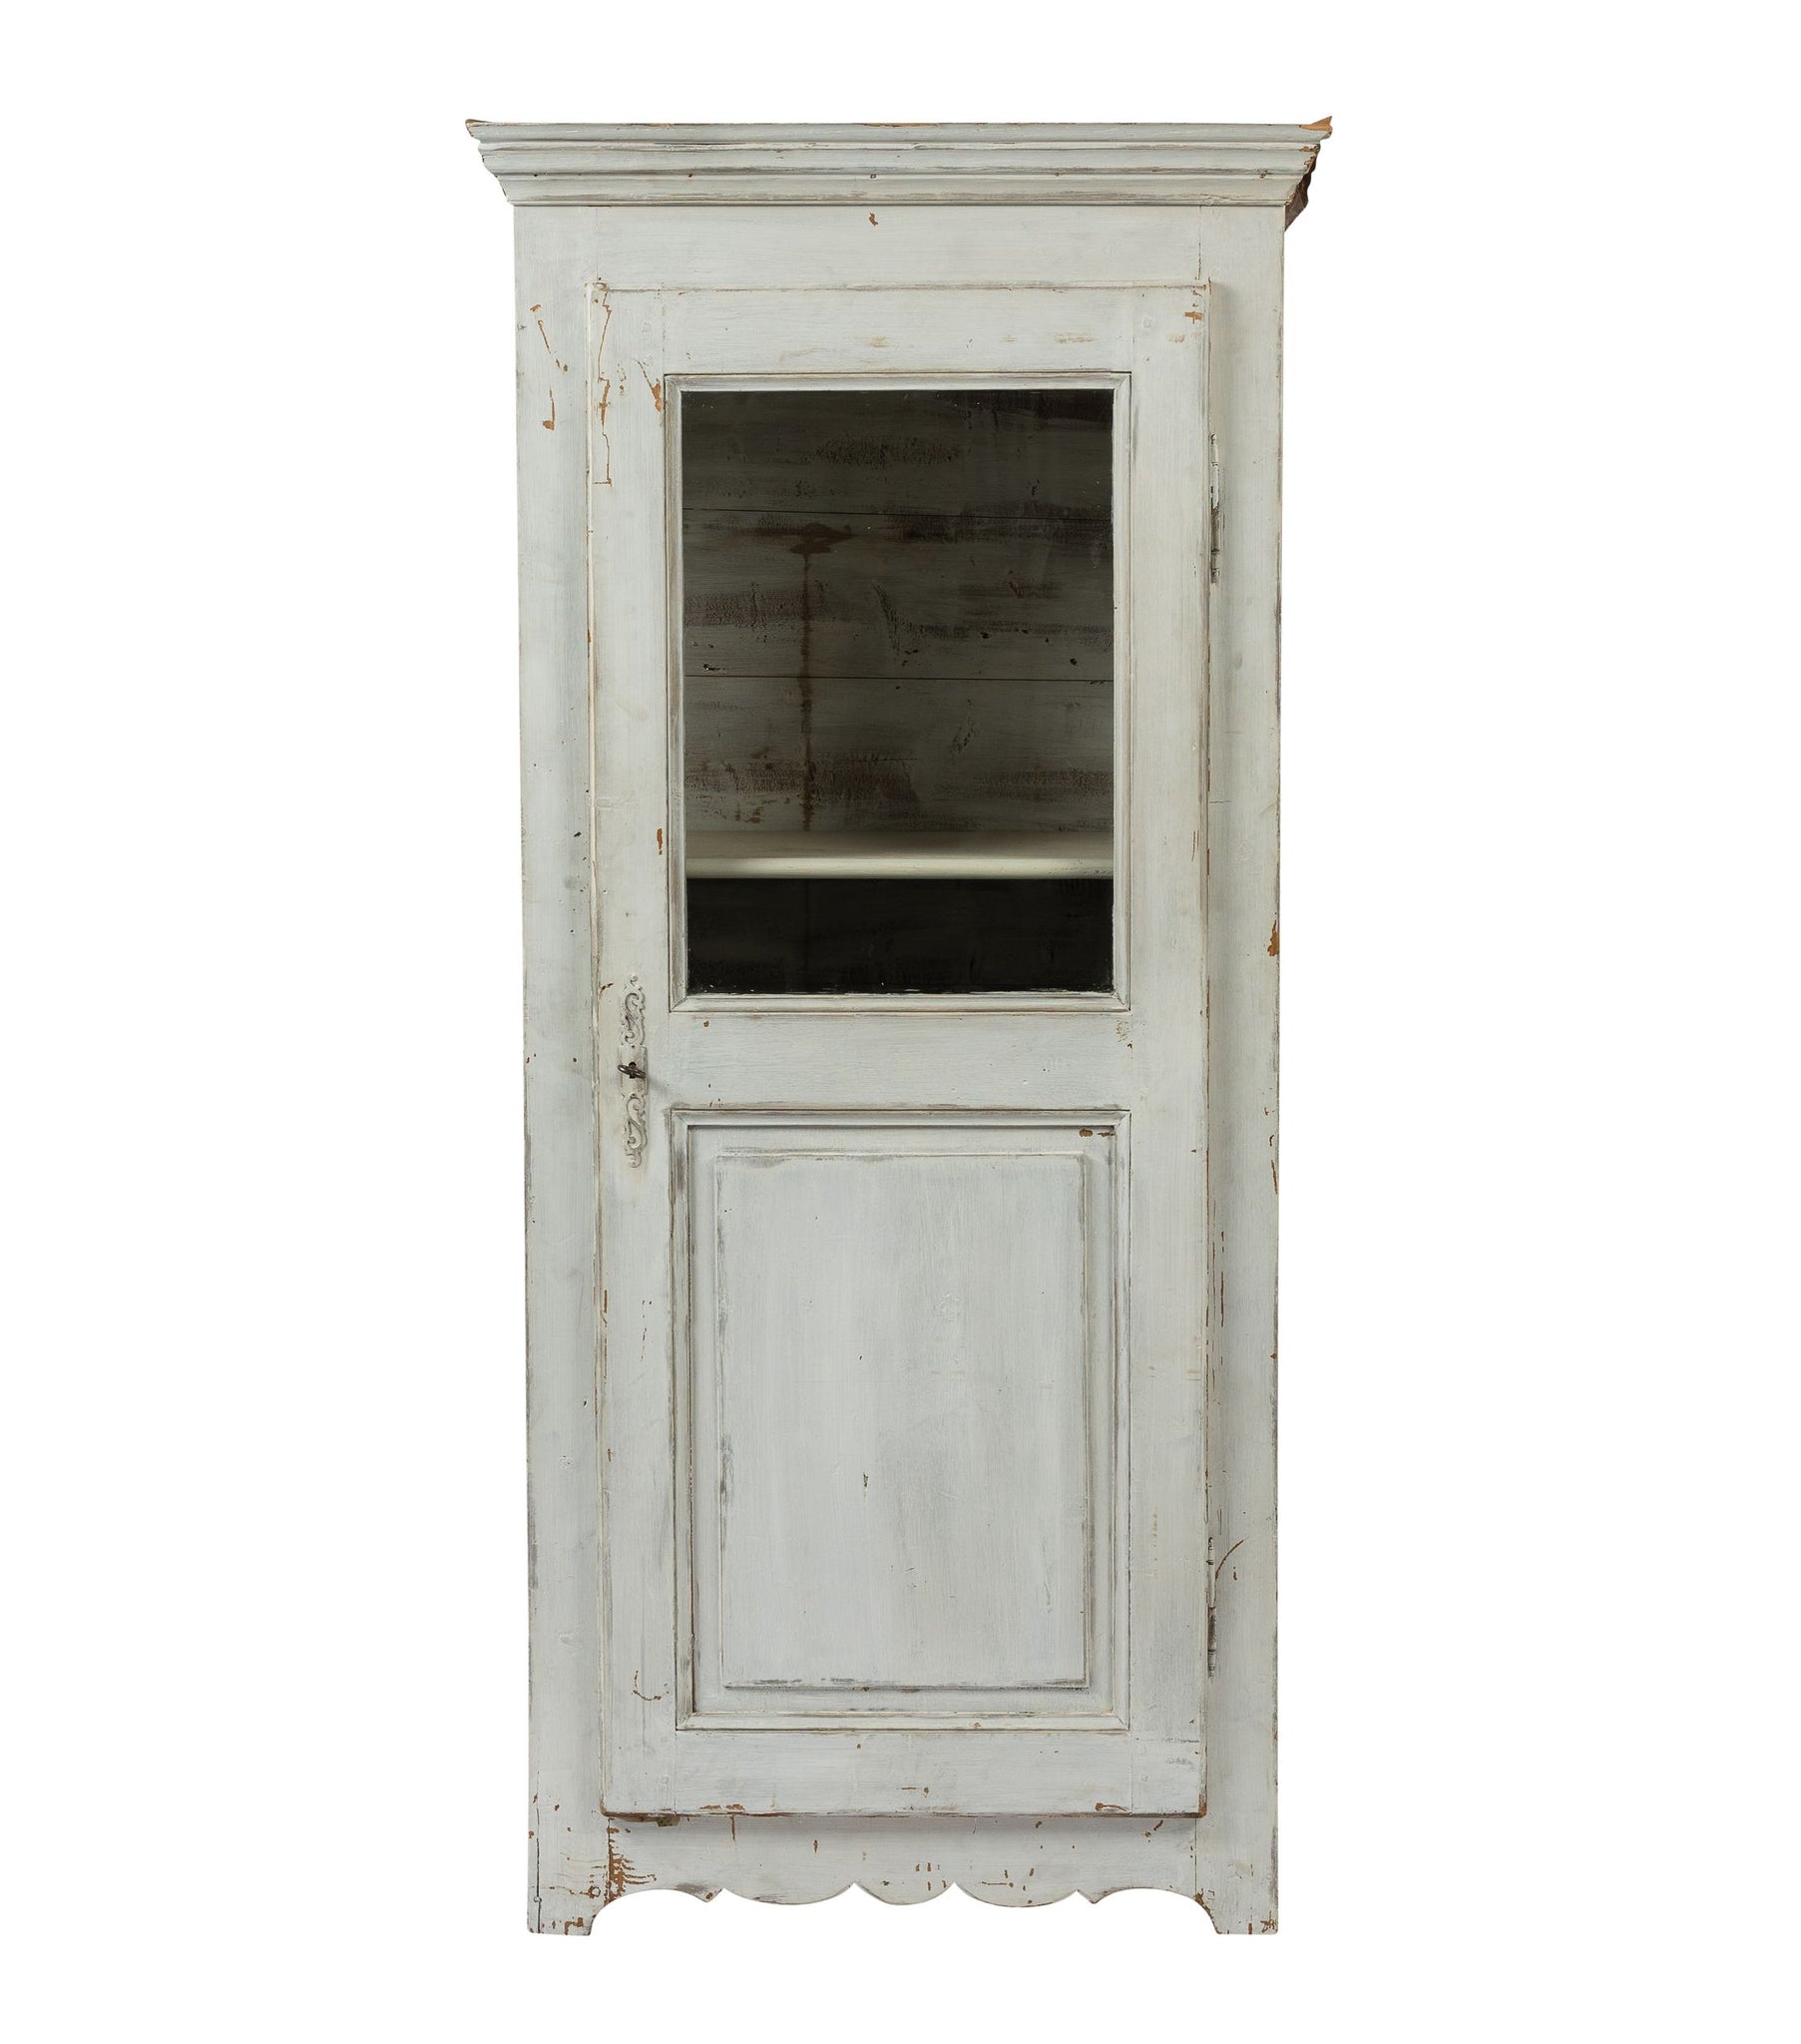 Vintage French White painted single-door Cupboard with internal shelving from Provence